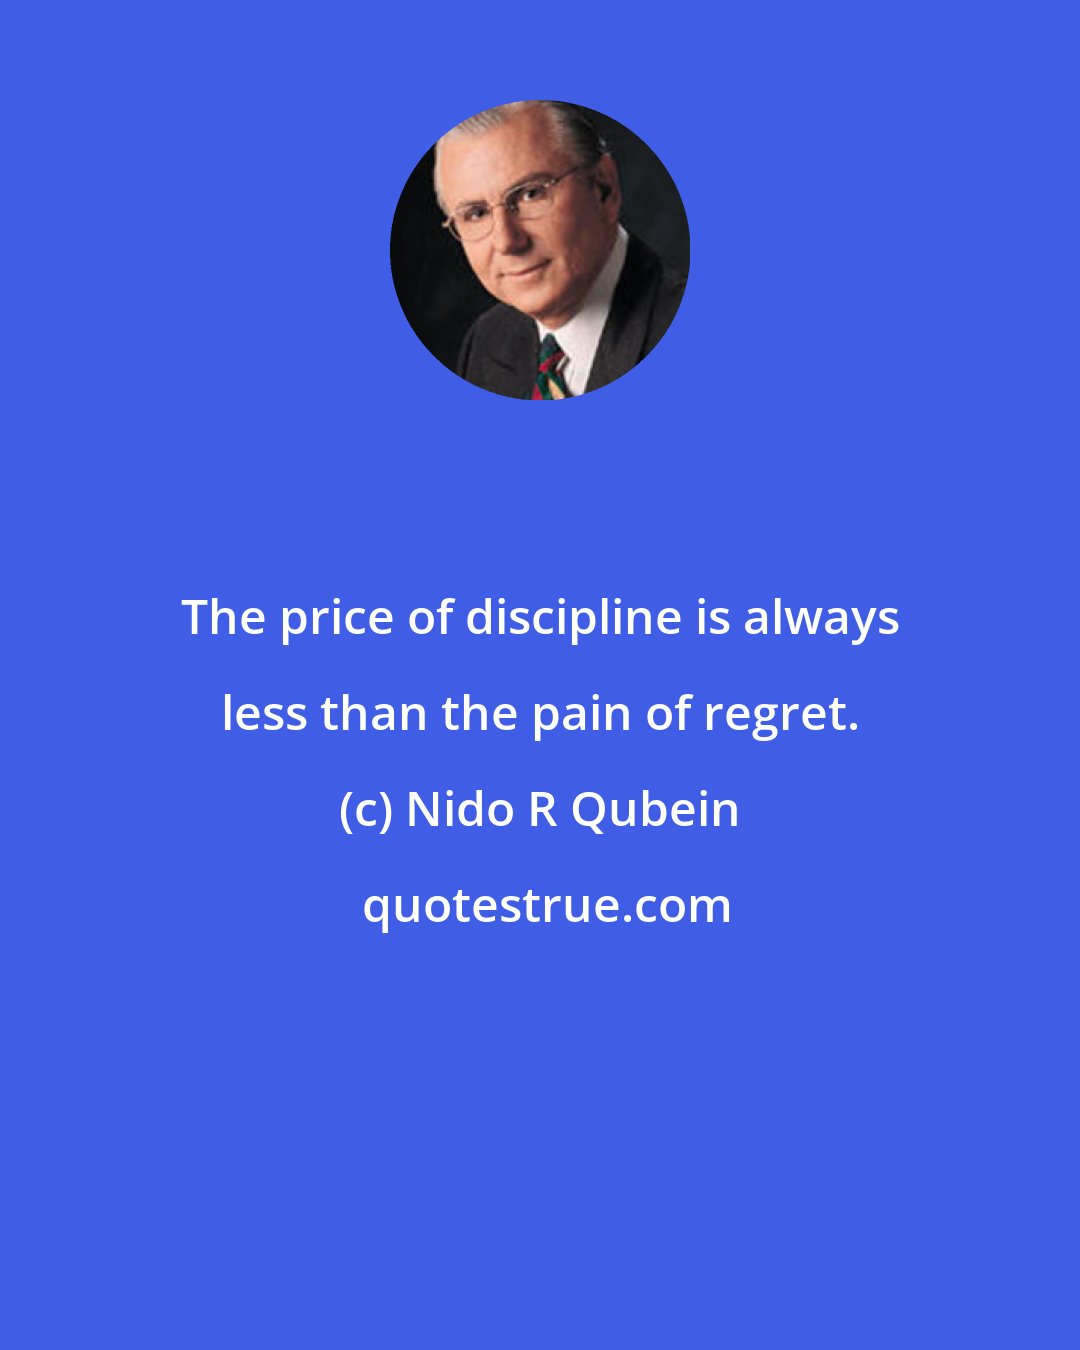 Nido R Qubein: The price of discipline is always less than the pain of regret.